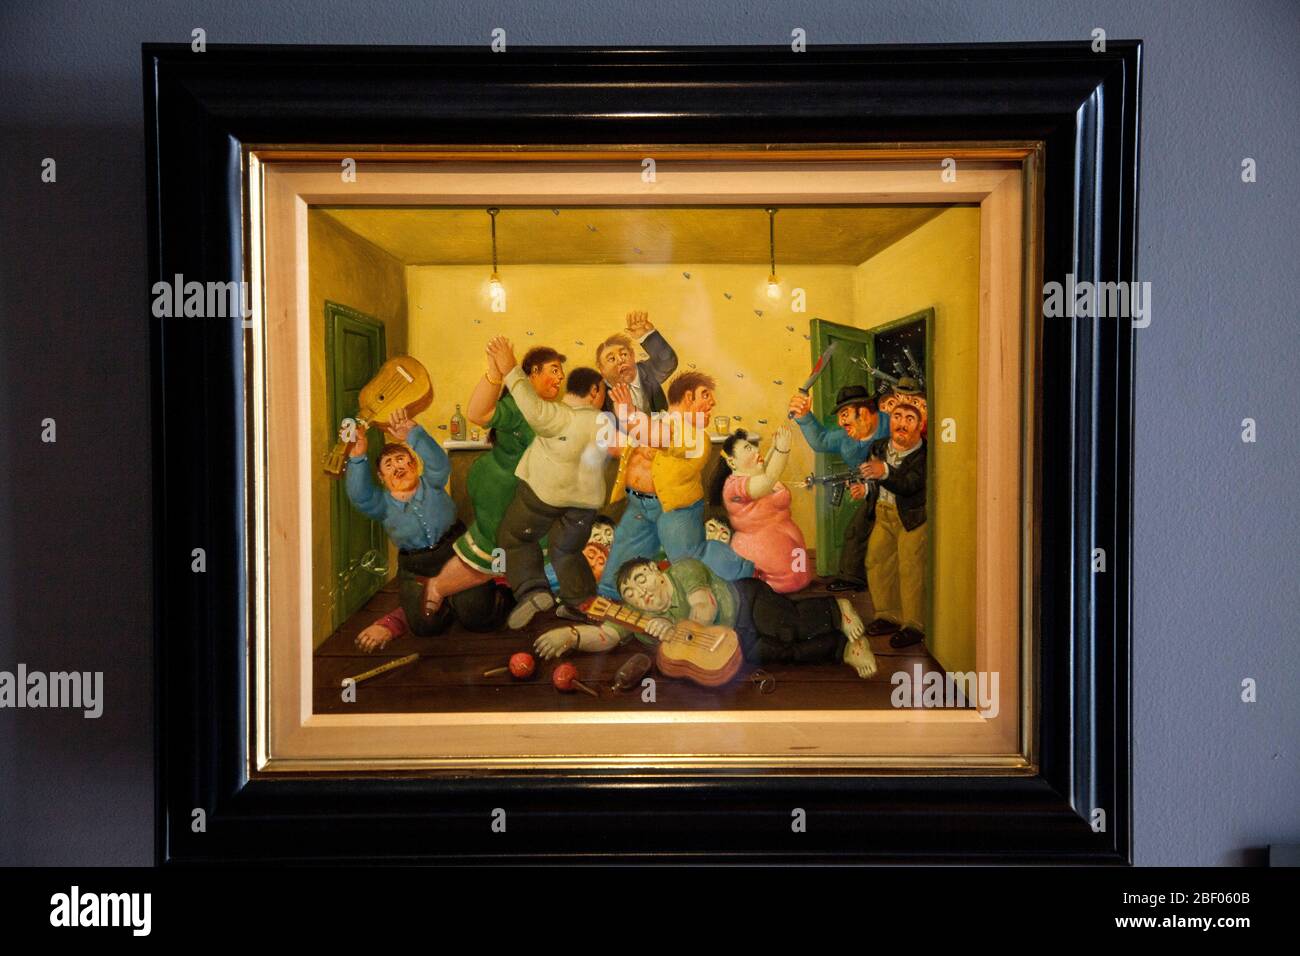 Massacre On The Best Corner 1997 painting by Botero at the Botero Museum also known as Museo Botero, Bogotá, Colombia, South America. Stock Photo